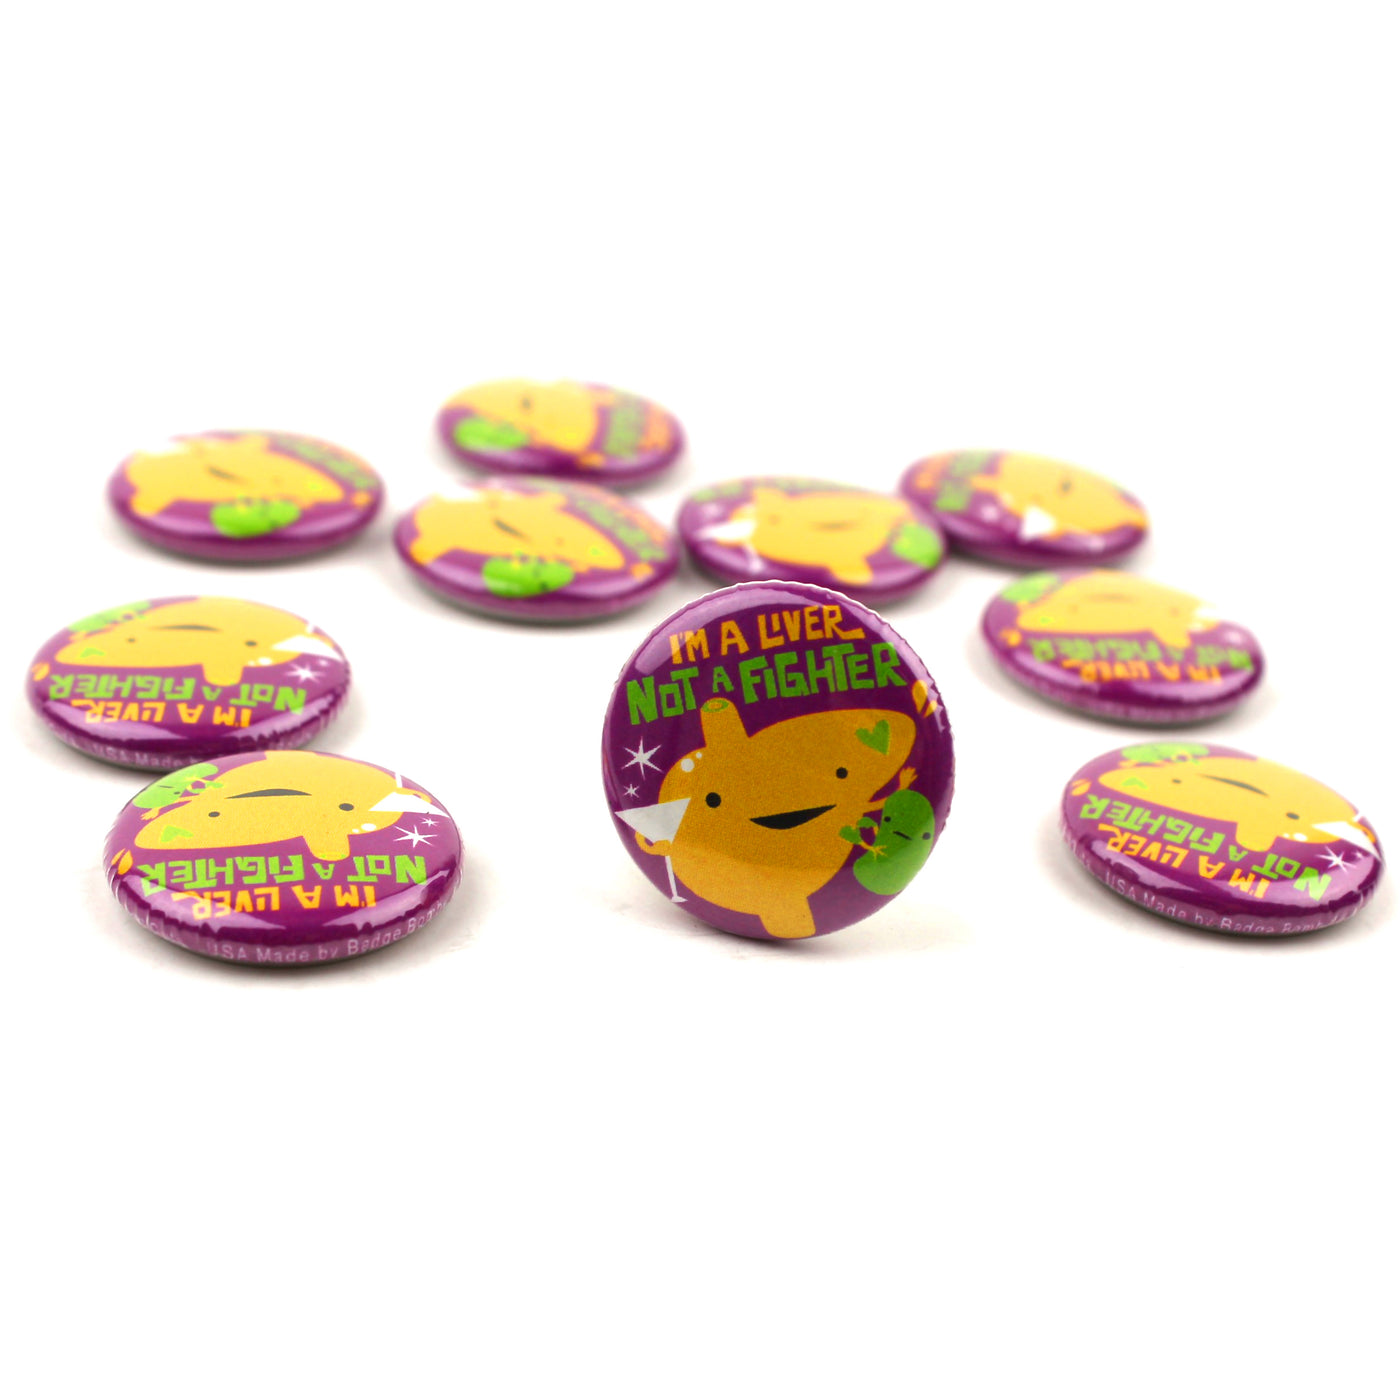 Liver Buttons - Cute Liver Button - Funny Anatomical Human Liver Badge